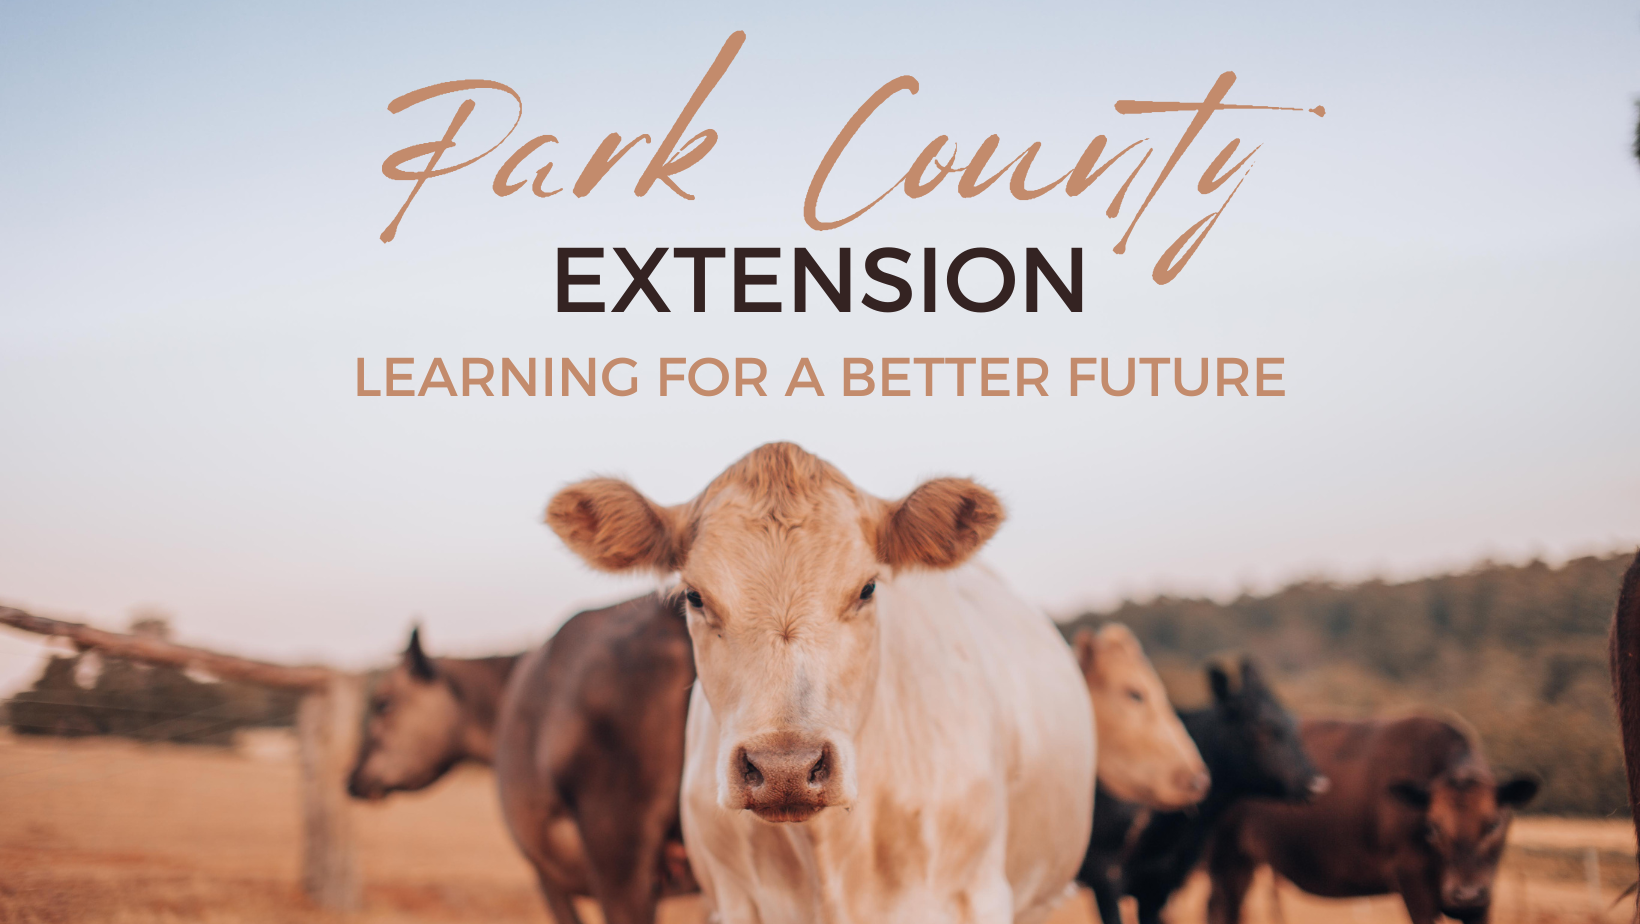 Park County Extension